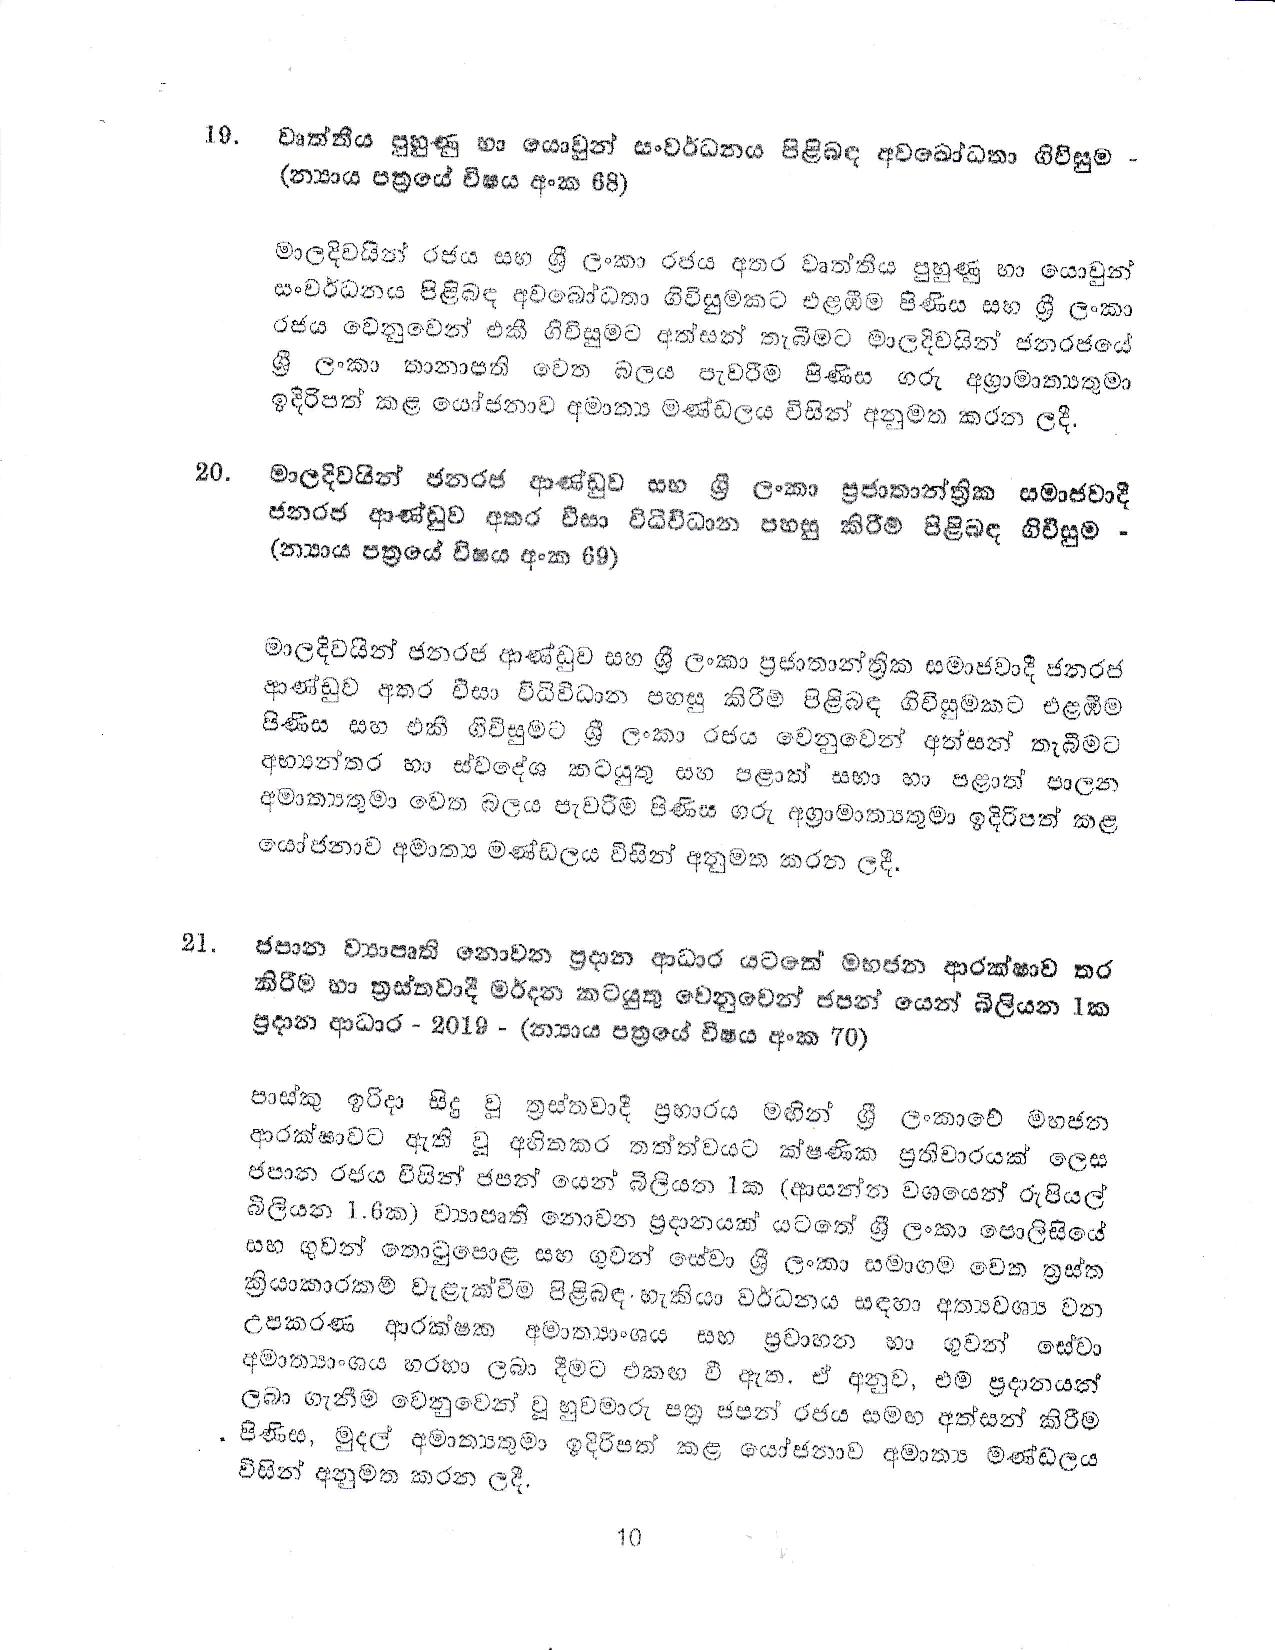 Cabinet Decision 27.08.2019 page 010